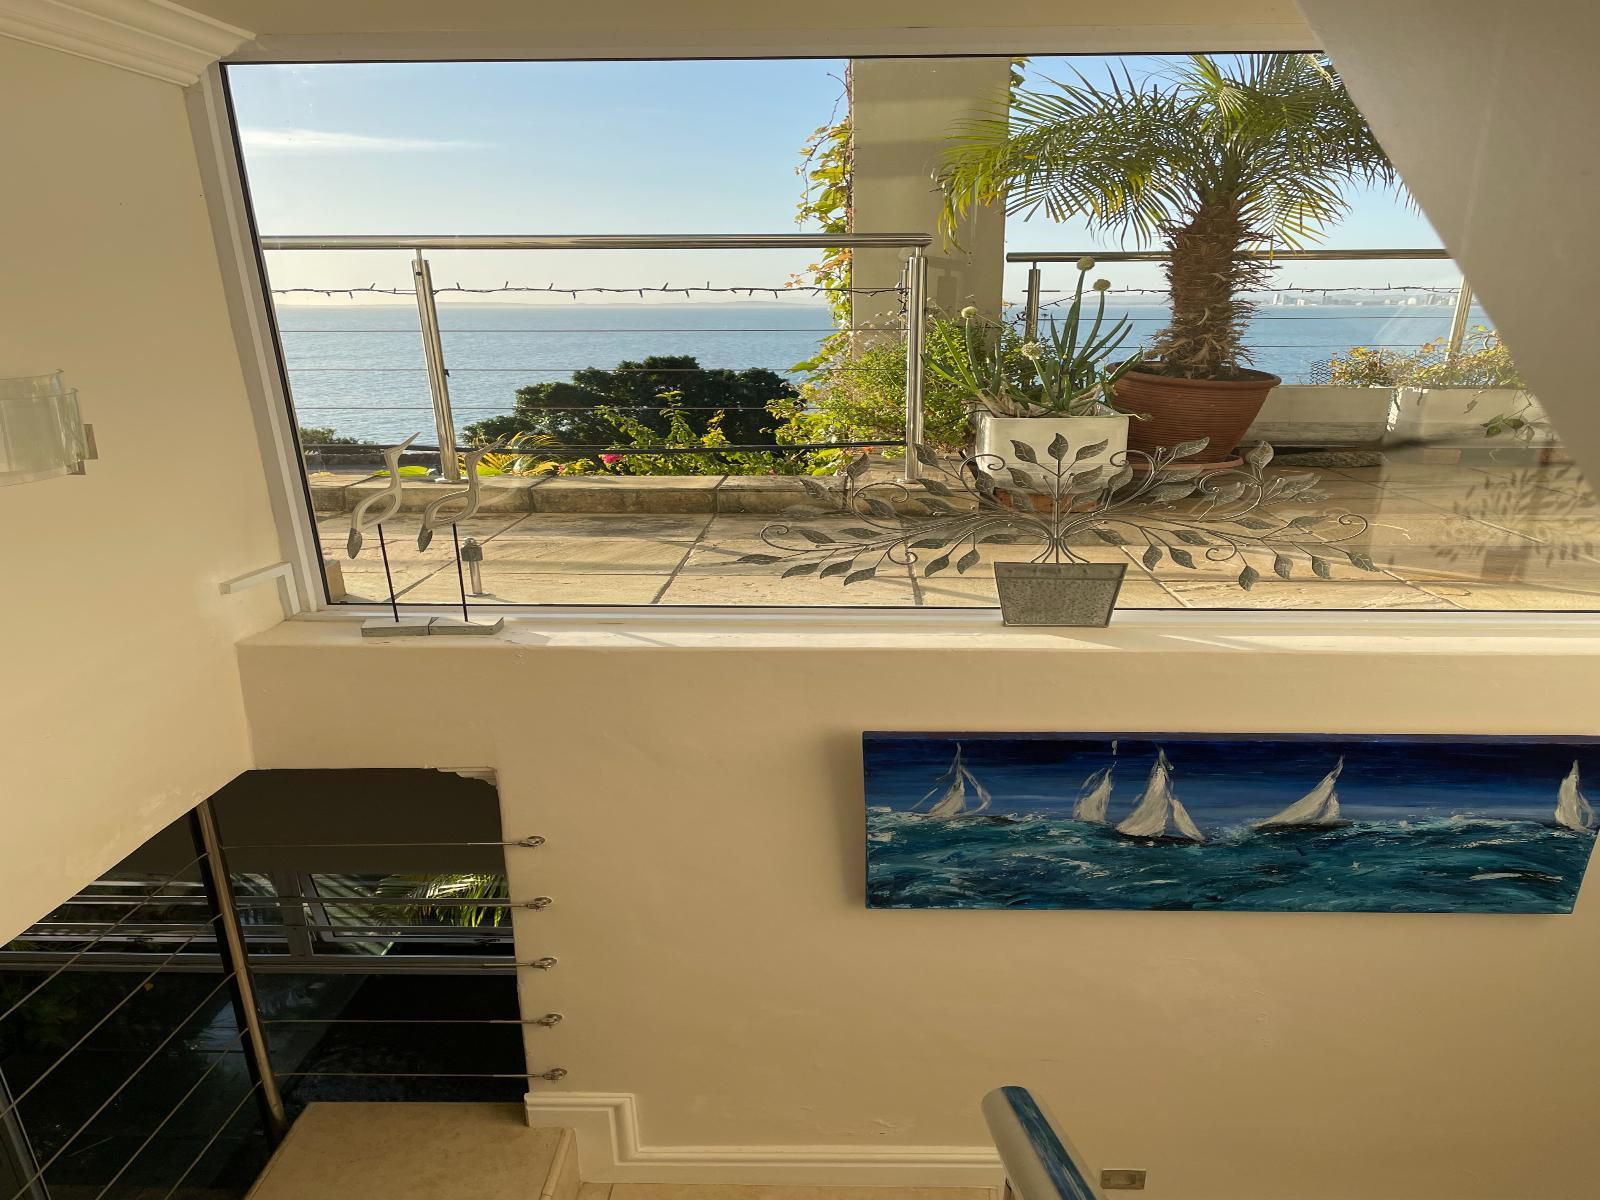 The Blue Marine Self Catering Mountainside Gordons Bay Western Cape South Africa Balcony, Architecture, Beach, Nature, Sand, Palm Tree, Plant, Wood